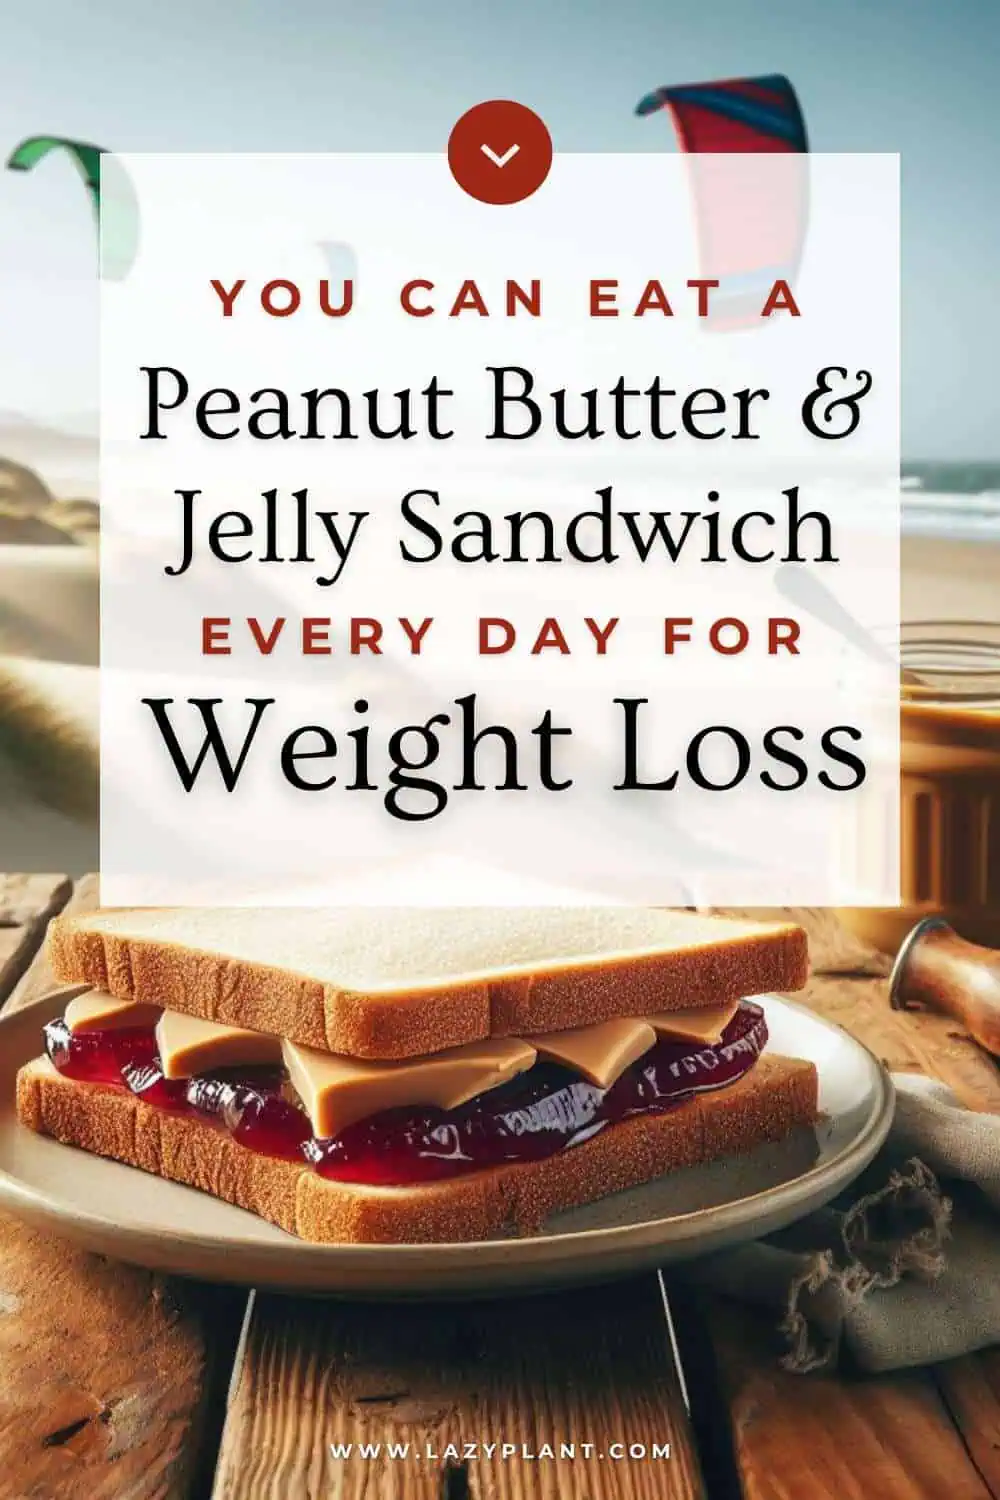 PB&J sandwich: Pros & Cons for Weight Loss